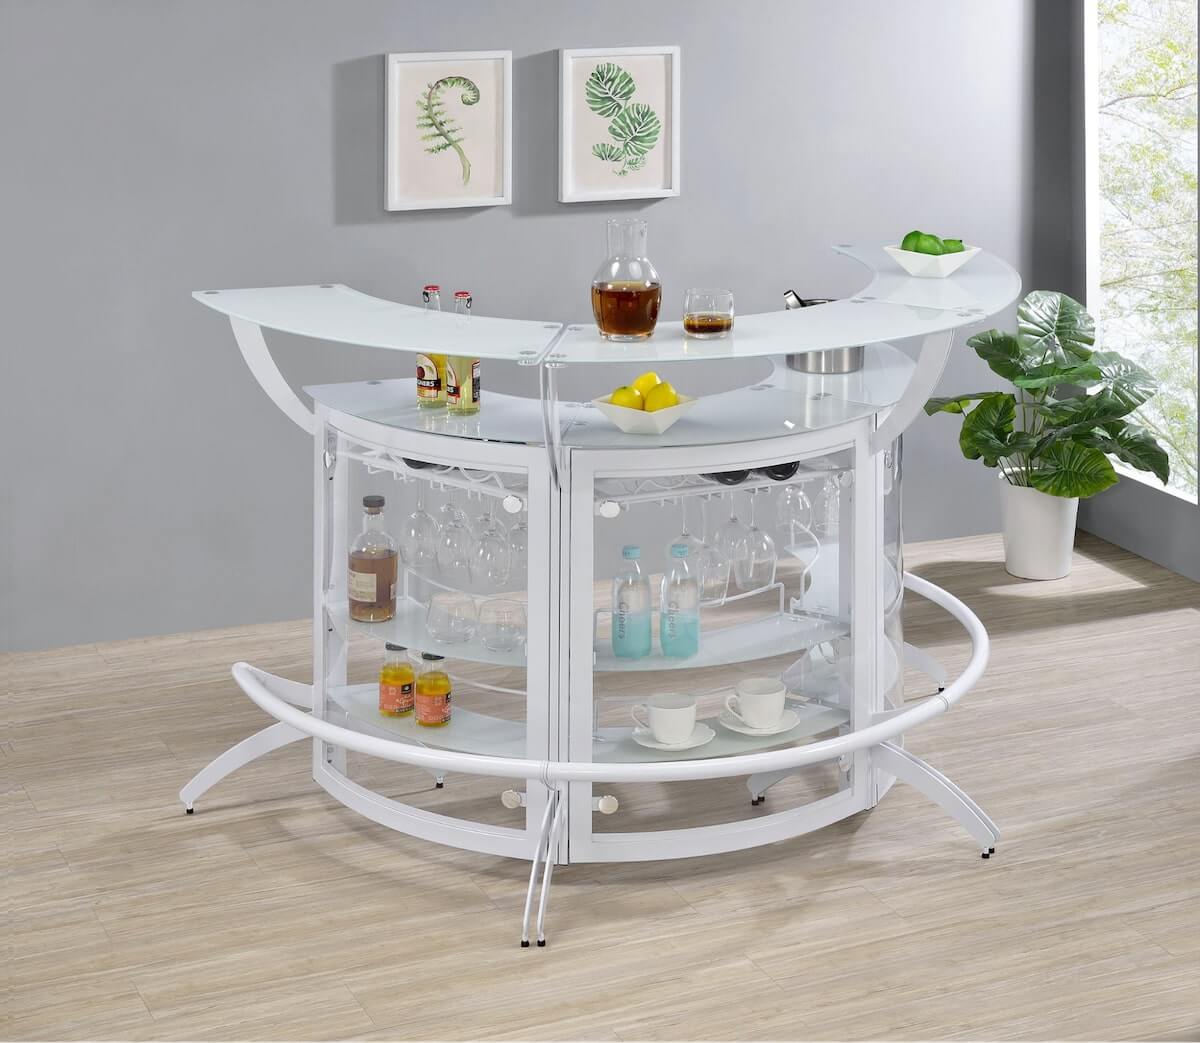 Retro furniture: Dallas 2-shelf Curved Home Bar White and Frosted Glass